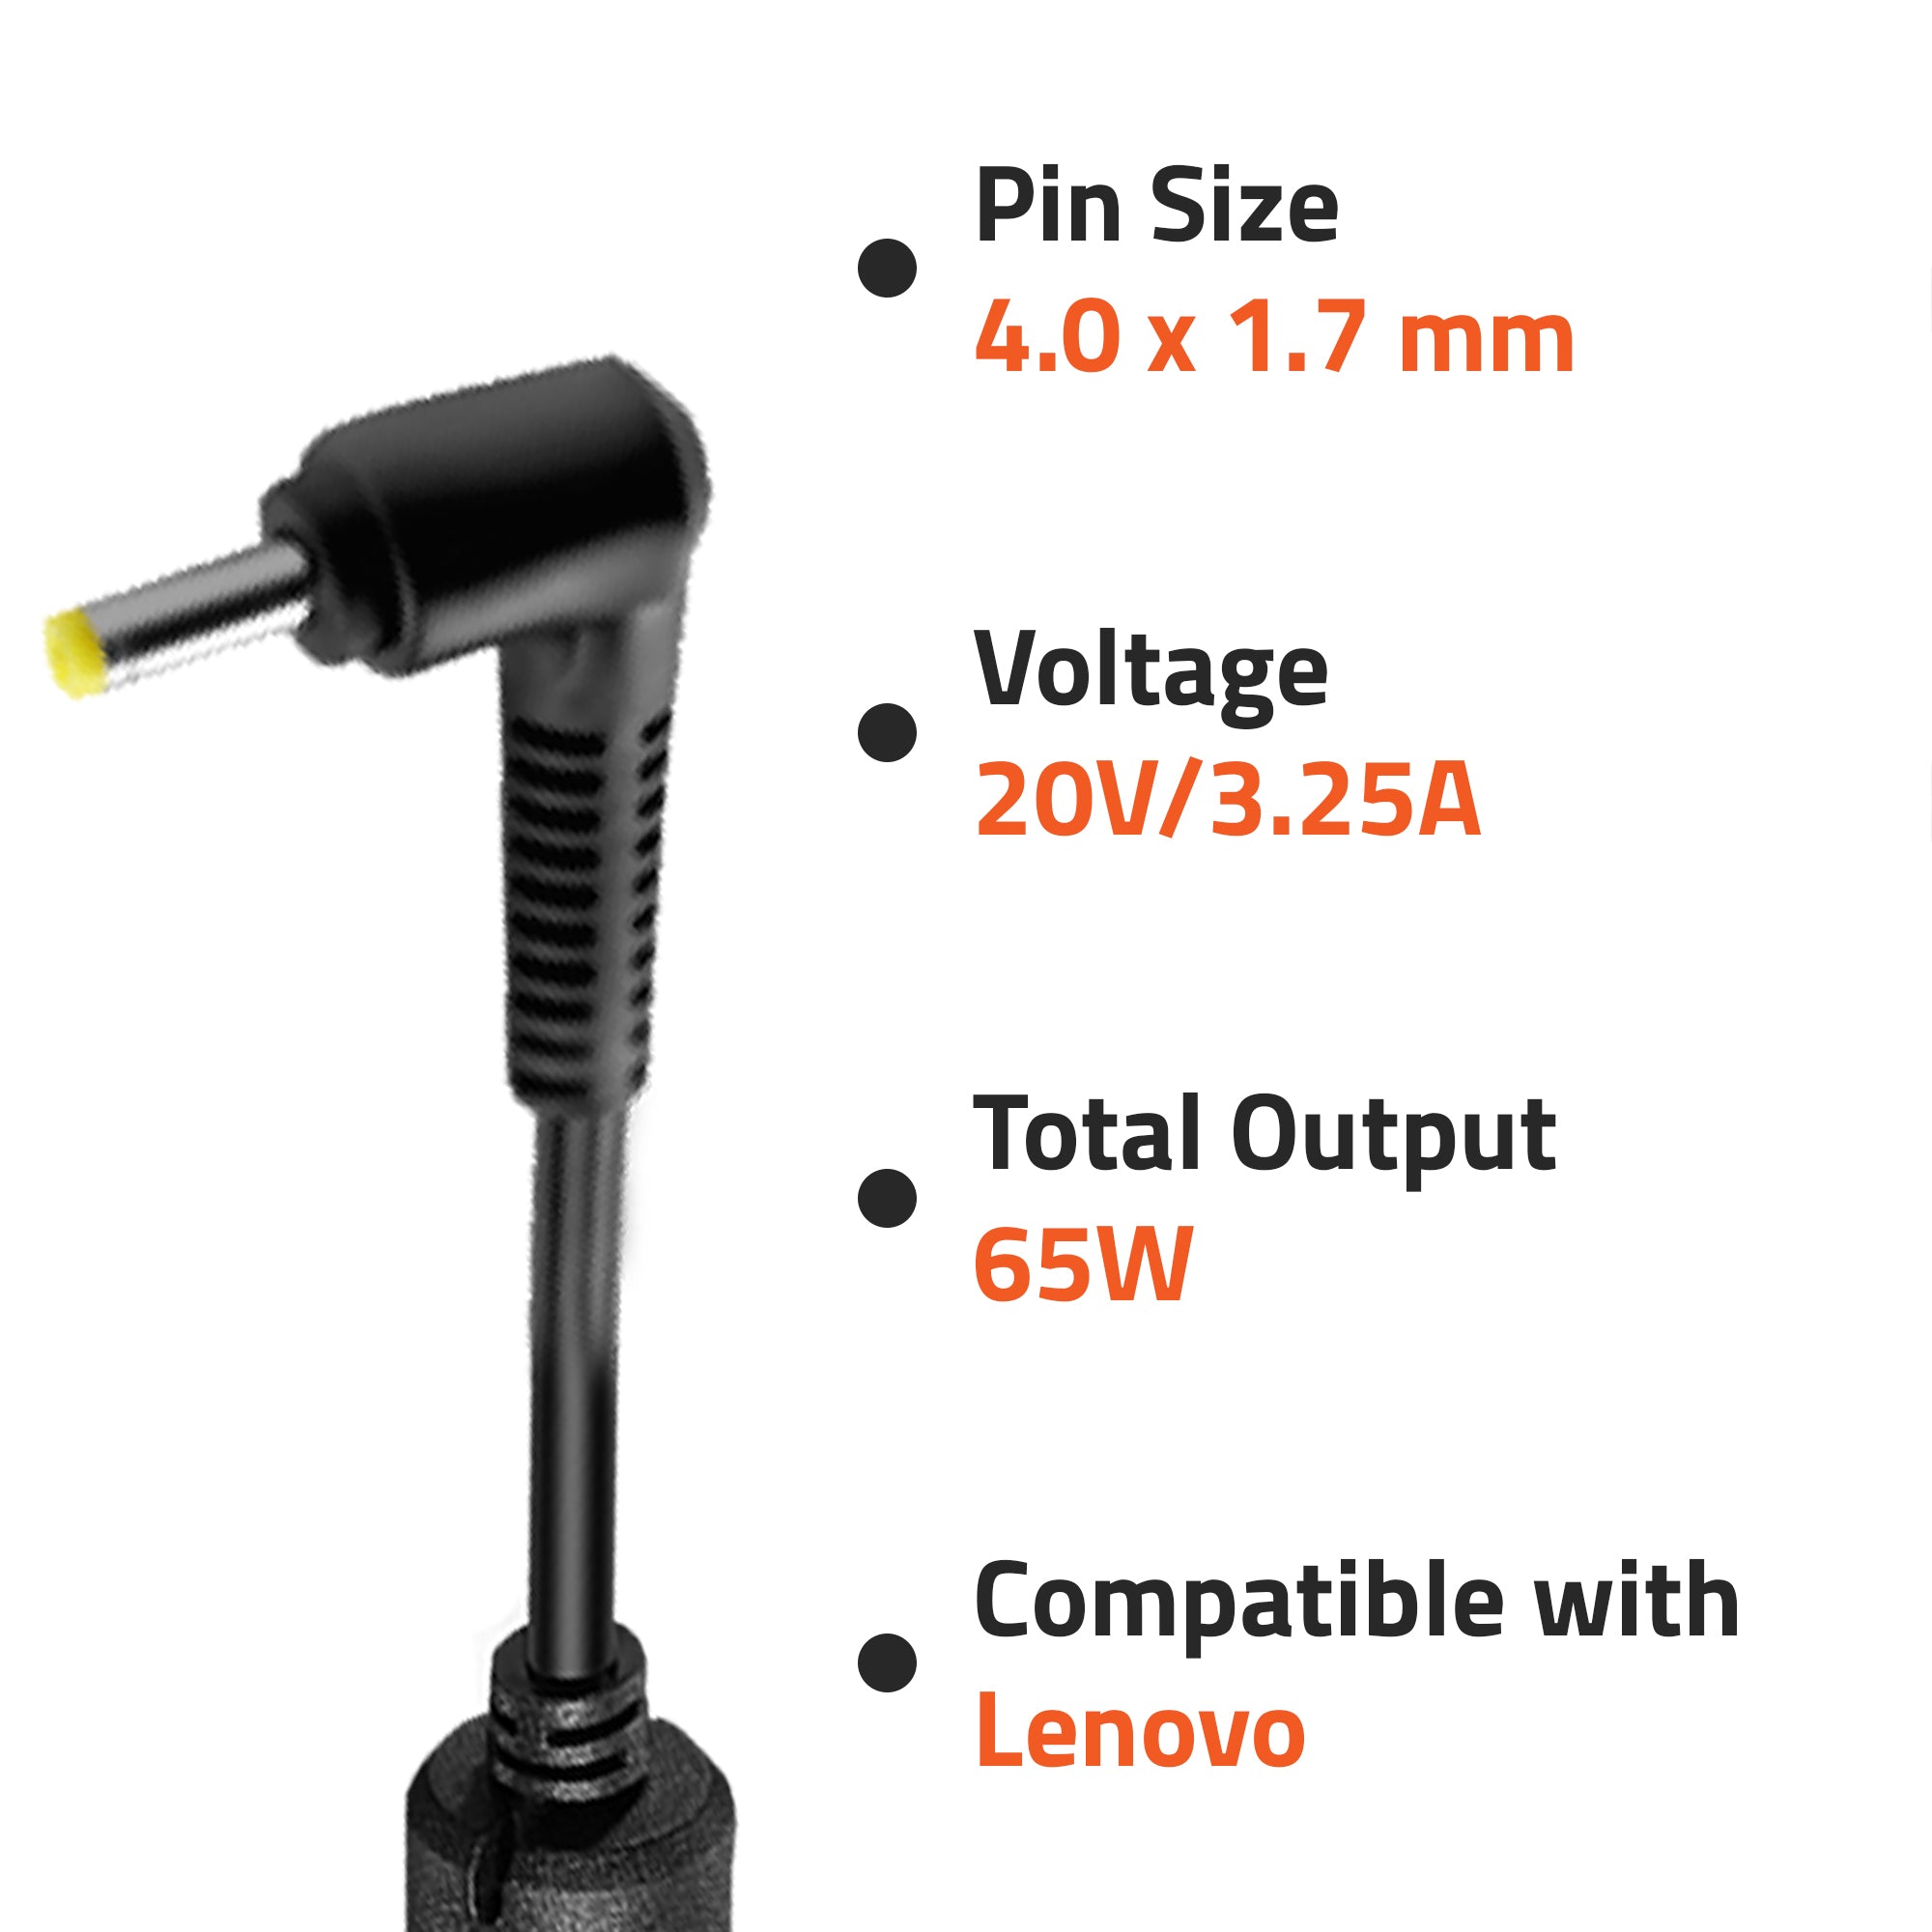 AR0504(N)  65Watt Laptop Adapter Compatible with Lenovo Laptops (20V/3.25A ,Pin : 4.0 x1.7 mm)